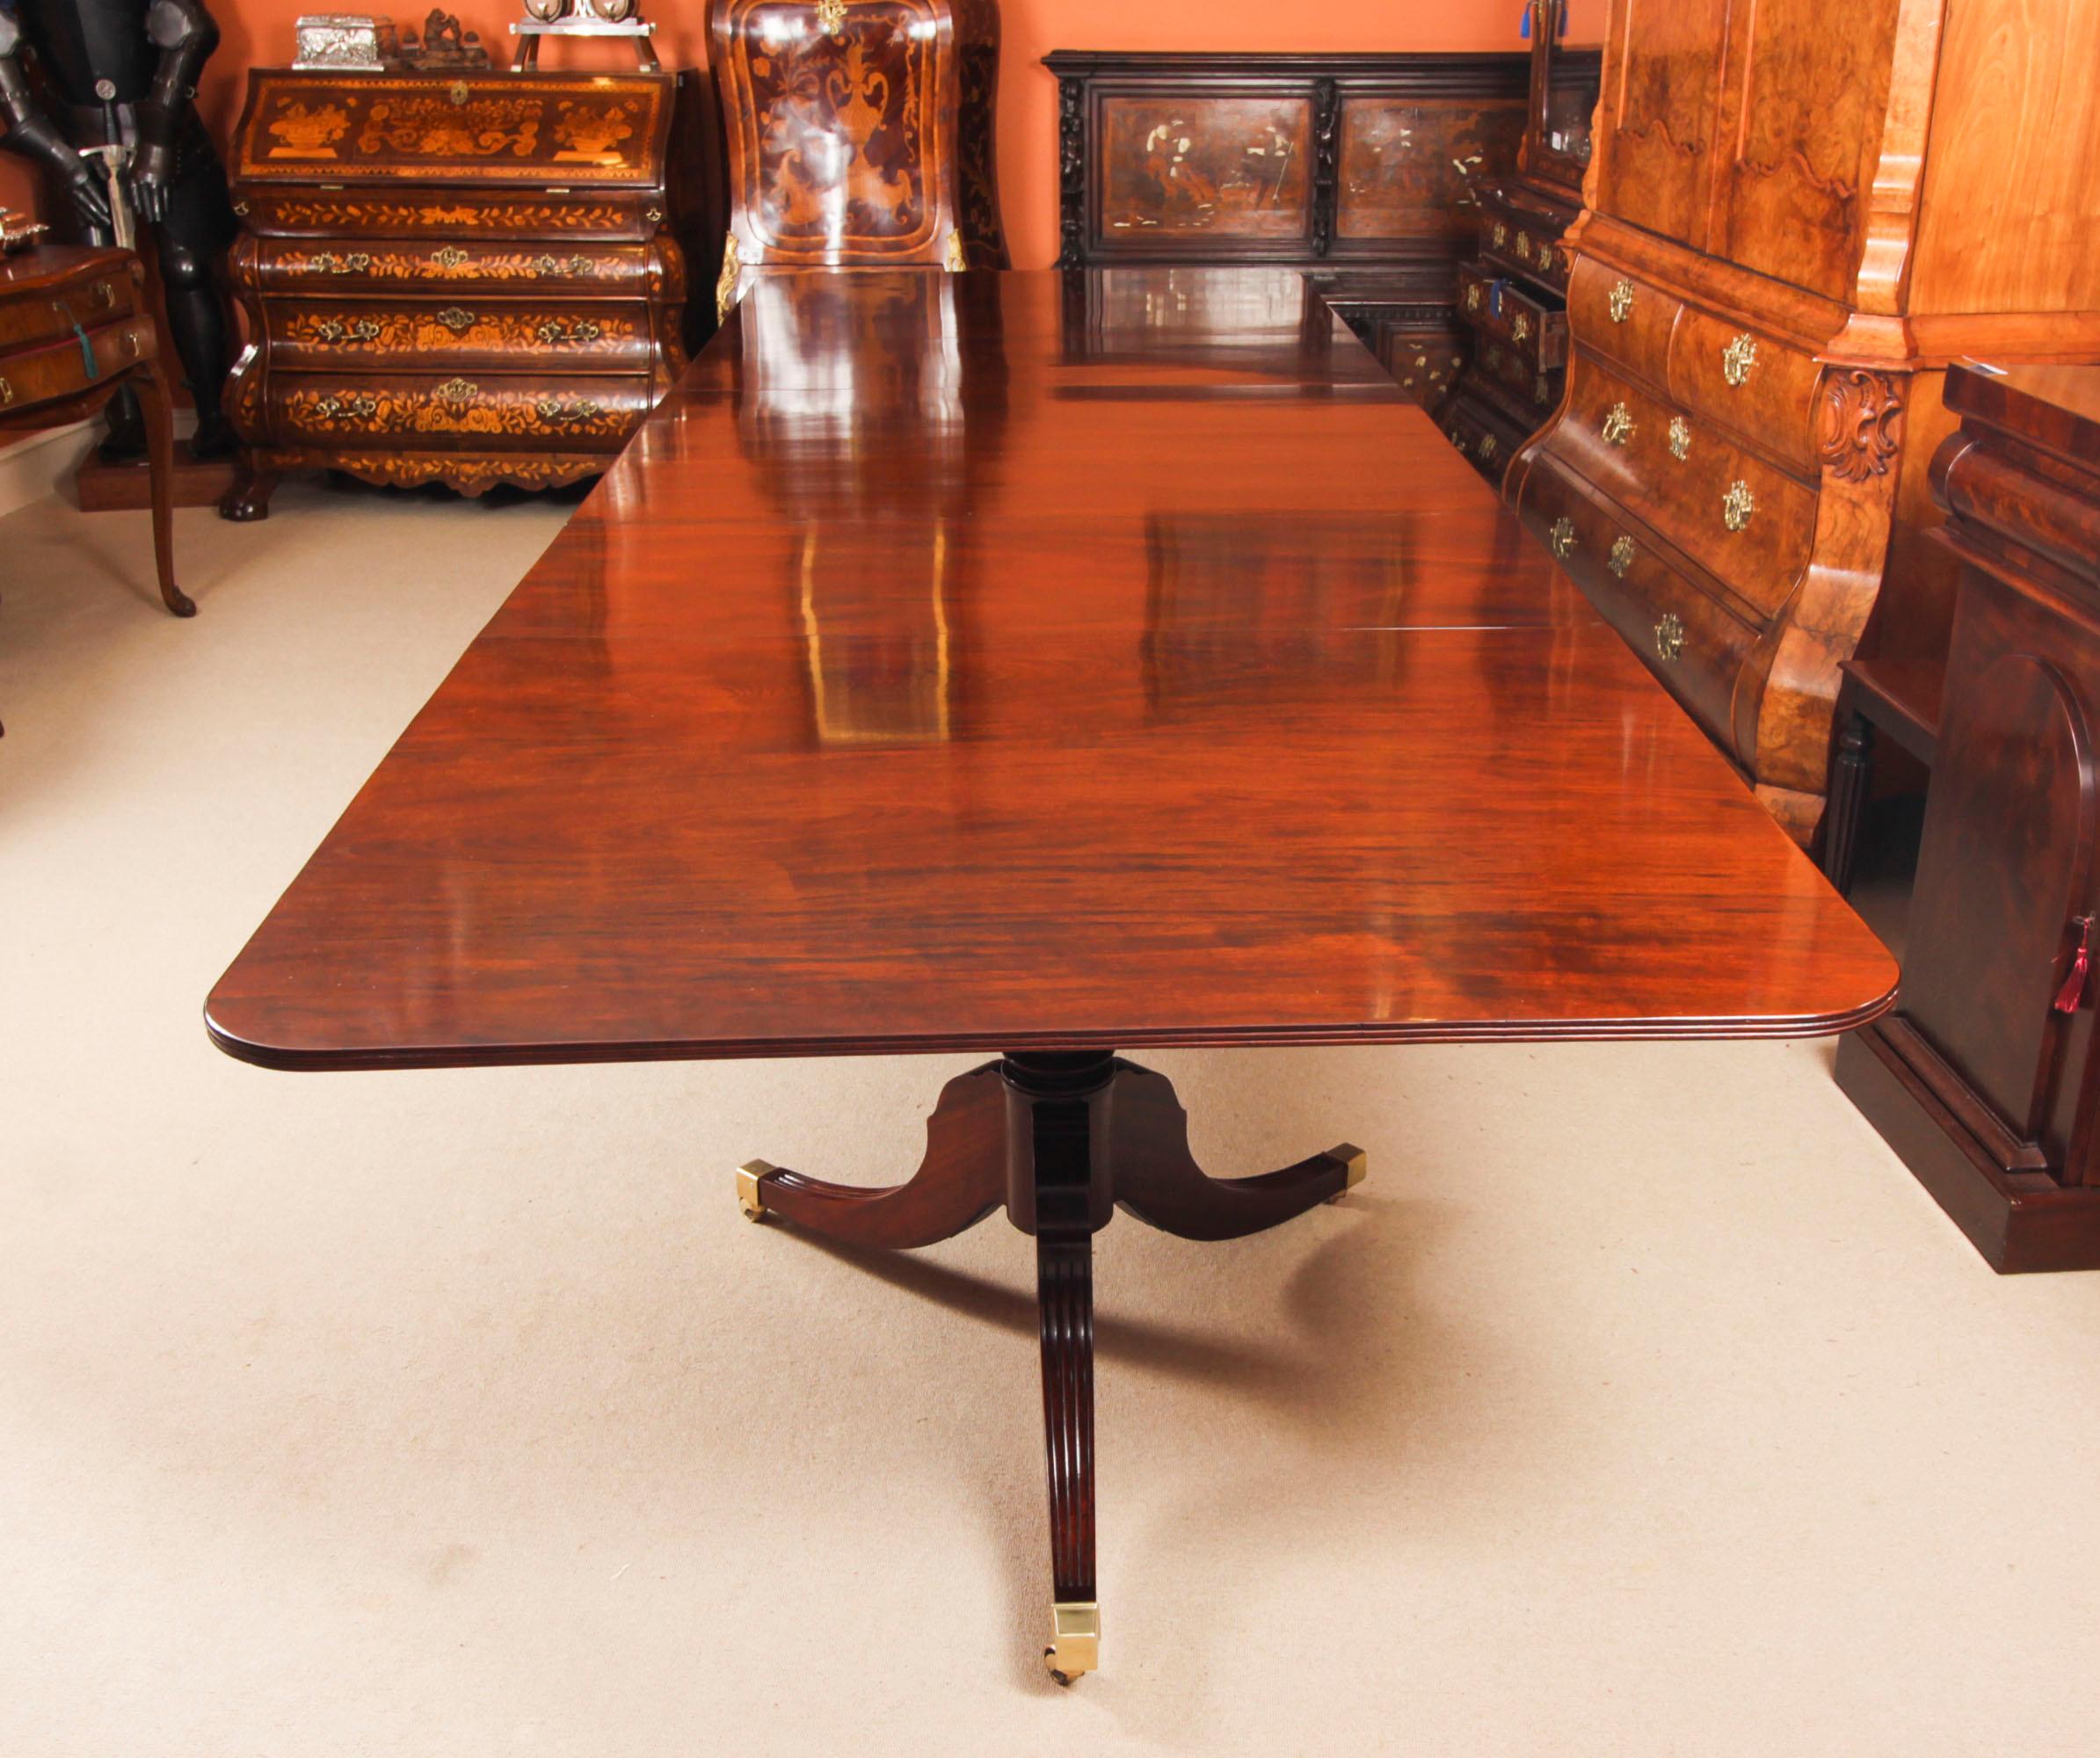 Antique 14ft Flame Mahogany Regency Revival Triple Pillar Dining Table 19th C For Sale 5